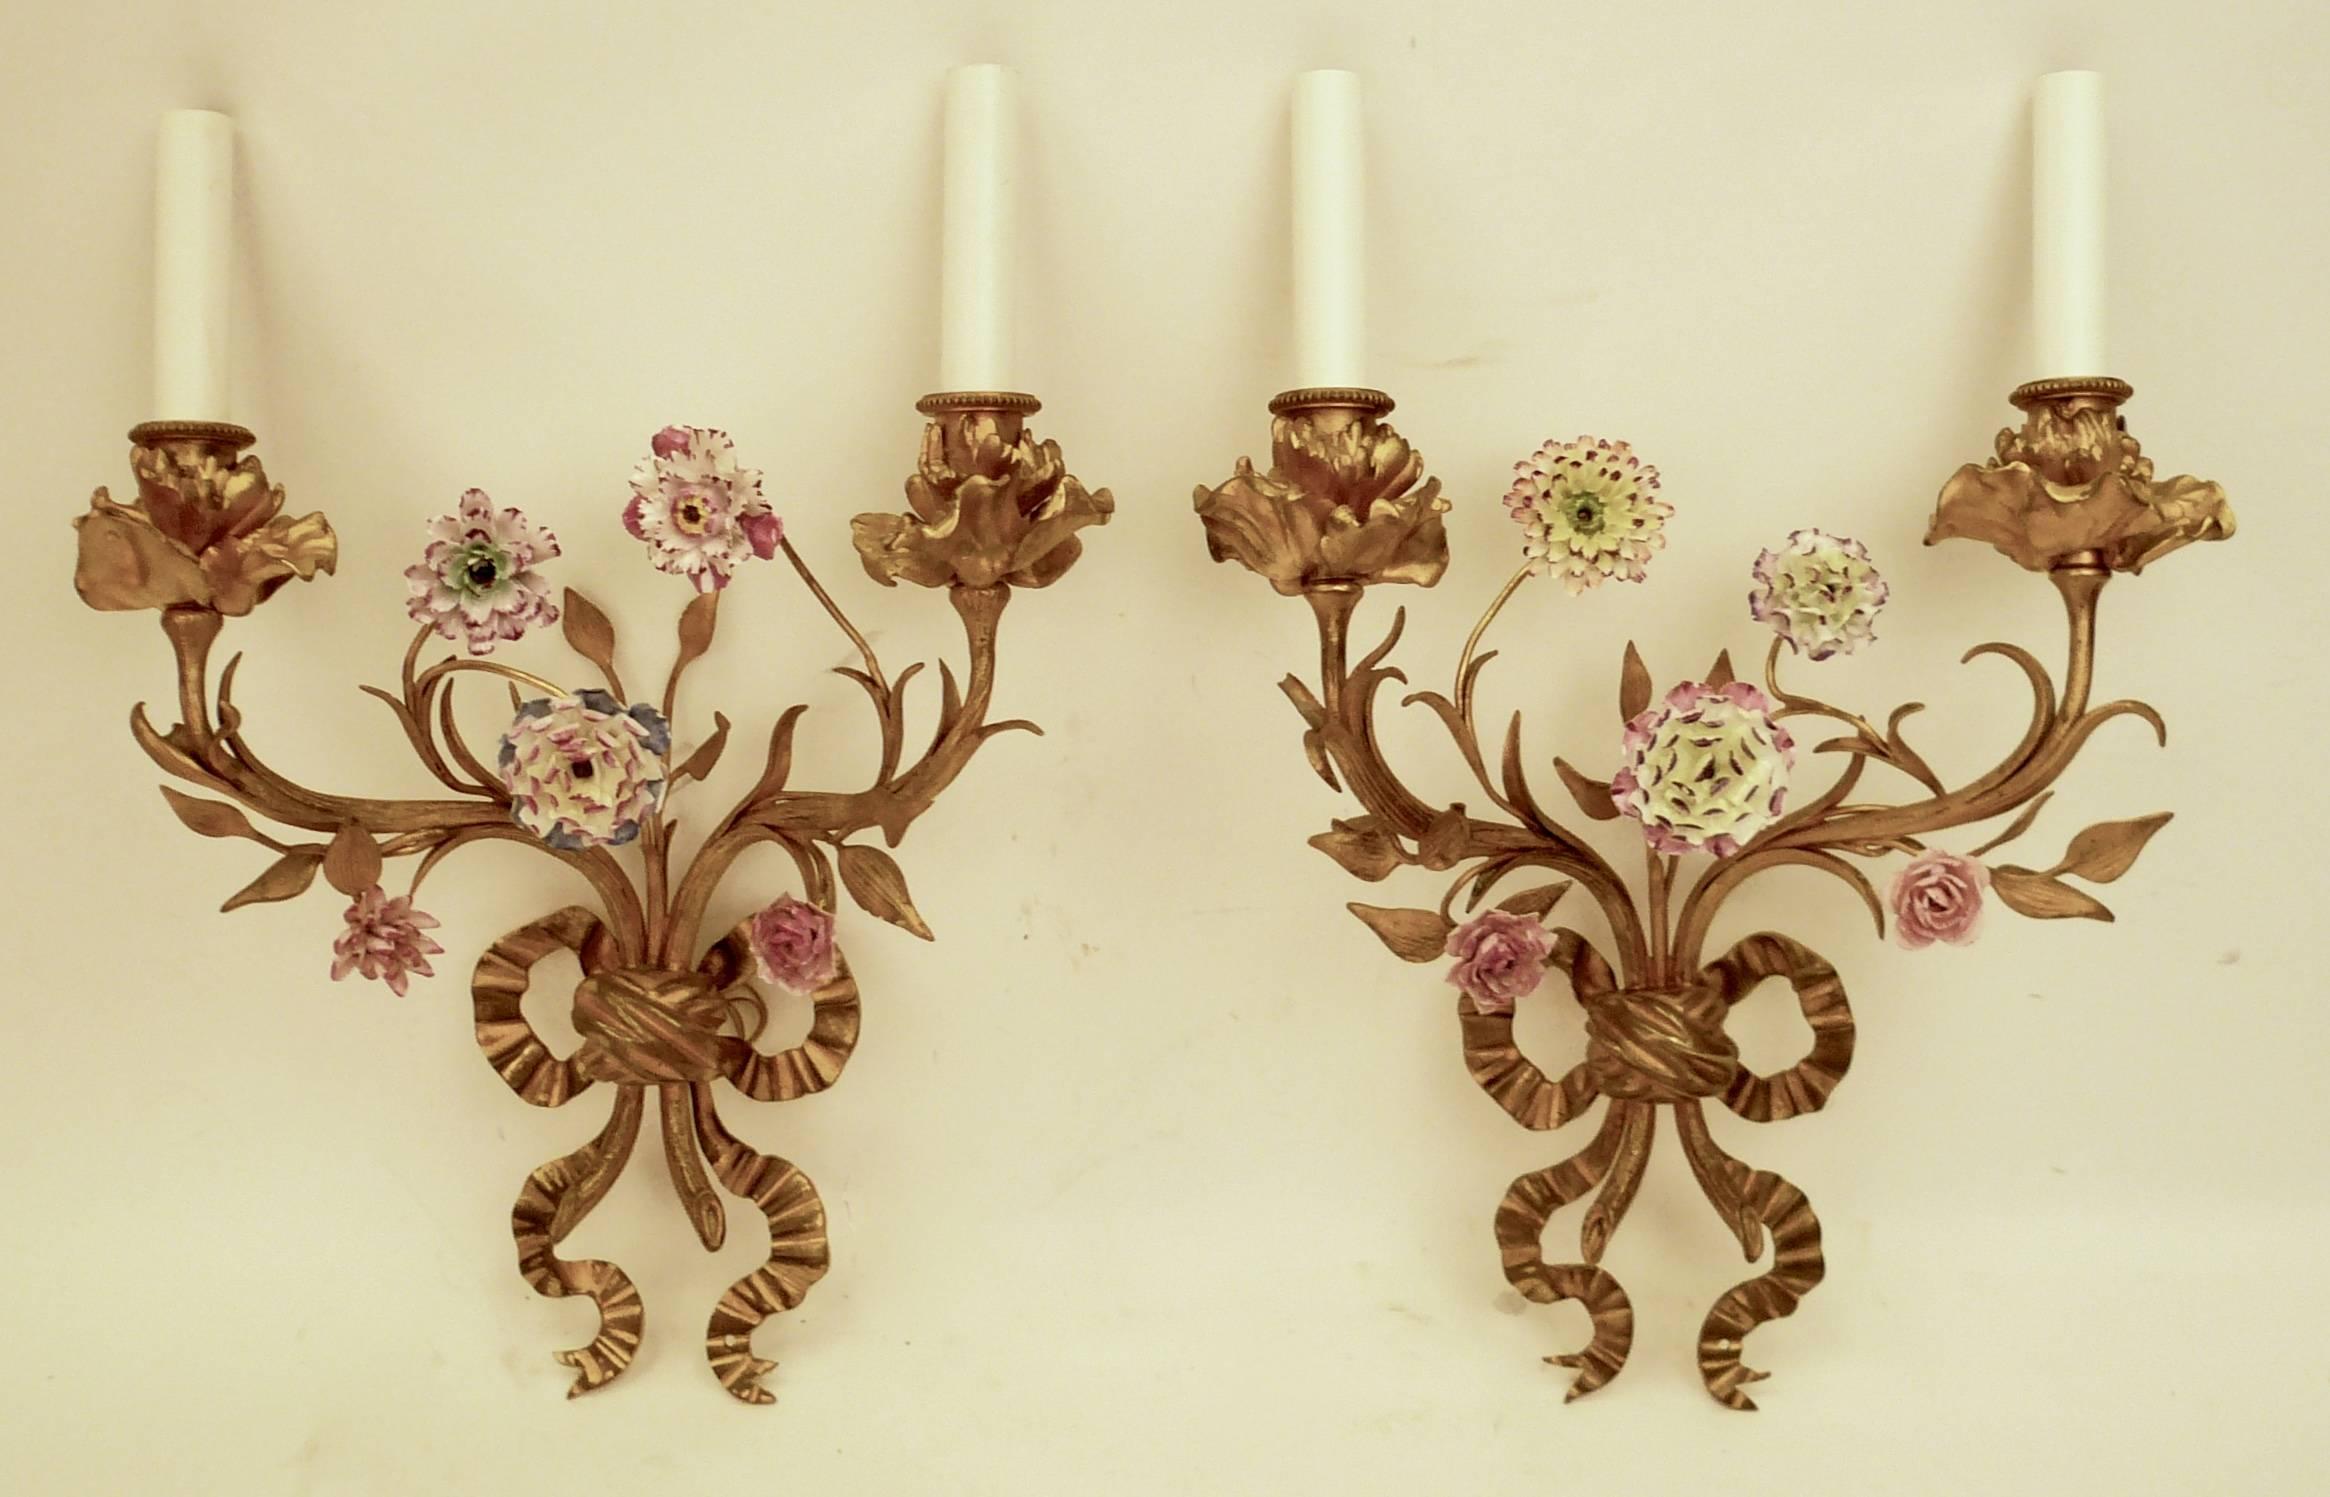 This fine pair of cast bronze foliate, and bow knot motif sconces feature hand-painted porcelain flowers.
They have been newly wired, and ready for use.